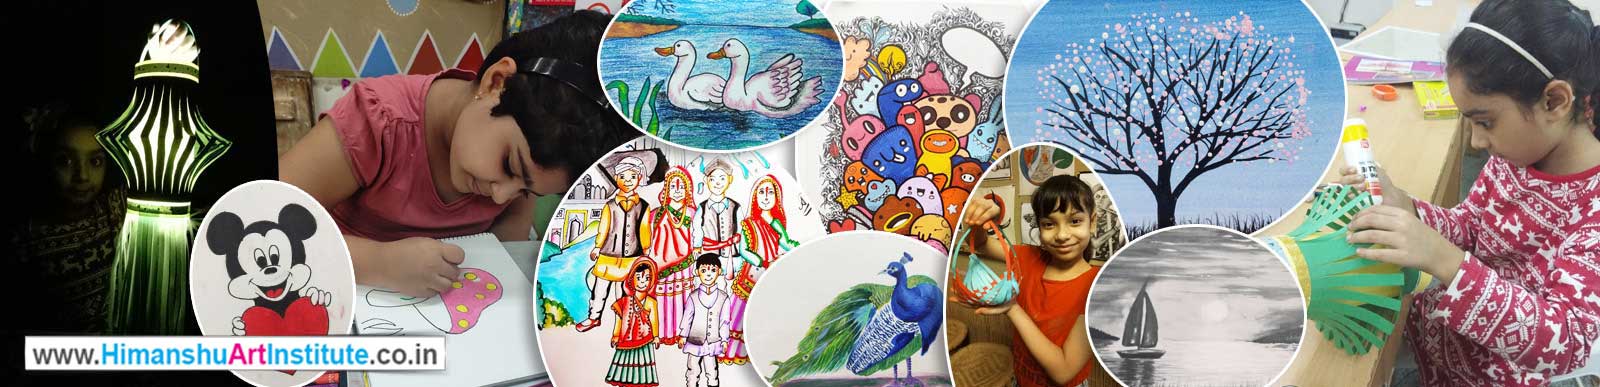 Certificate Course in Drawing & Painting for Kids Art Classes in Delhi, India